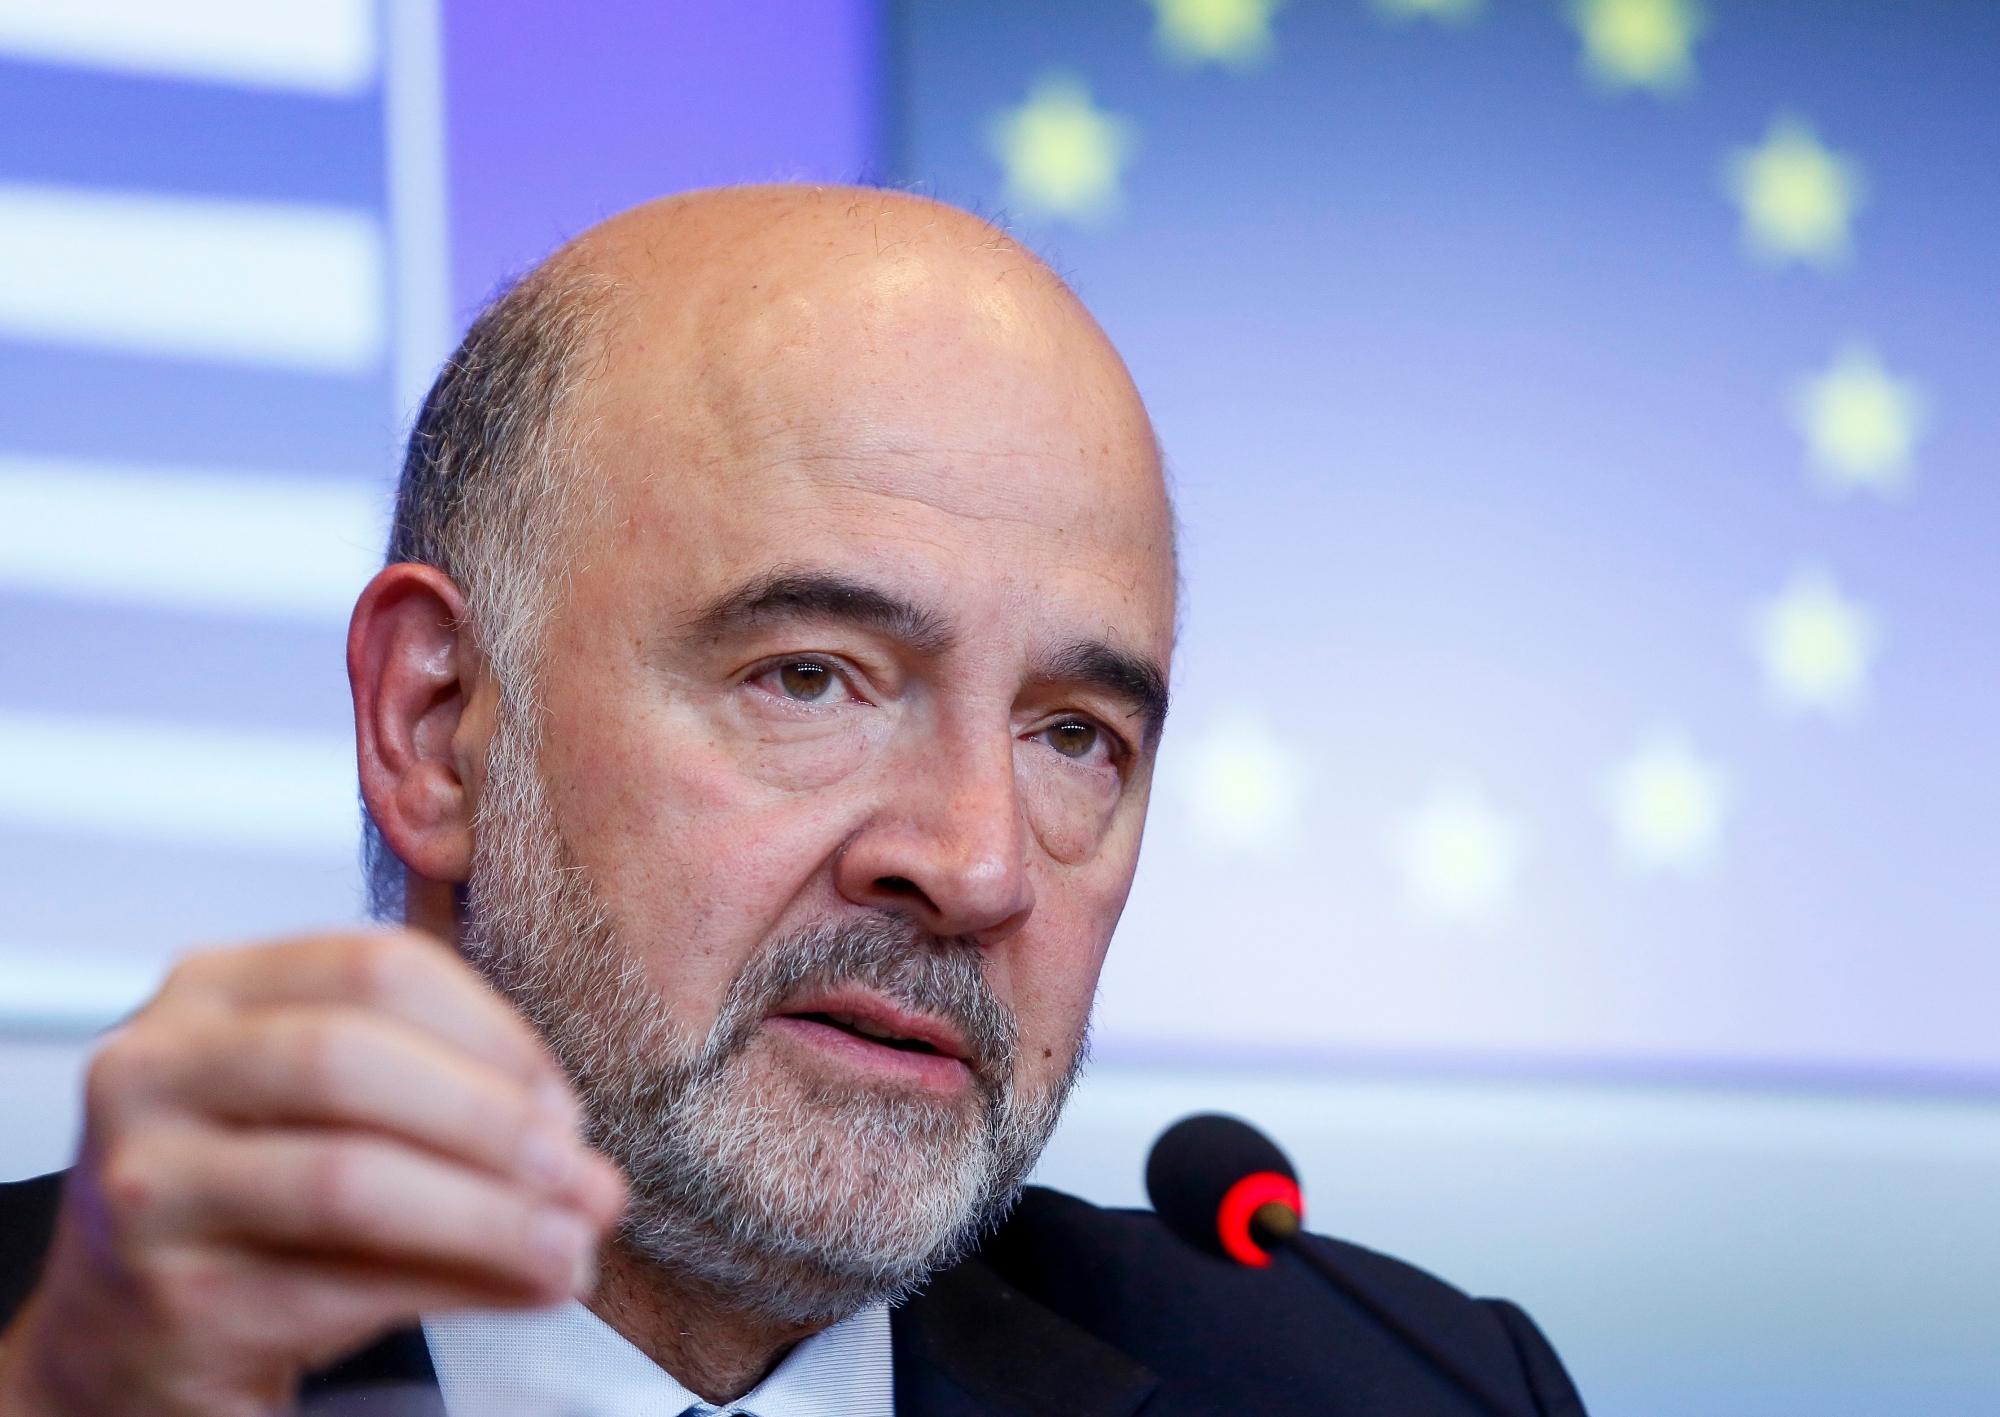 epa07647219 Pierre Moscovici, the European Commissioner for Economic and Financial Affairs and Taxation holds a joint news conference on the Eurogroup meeting in Luxembourg, 14 June 2019. Media reports European finance ministers agreed on the outline of a budget for the euro area.  EPA/JULIEN WARNAND LUXEMBOURG EU EUROGROUP